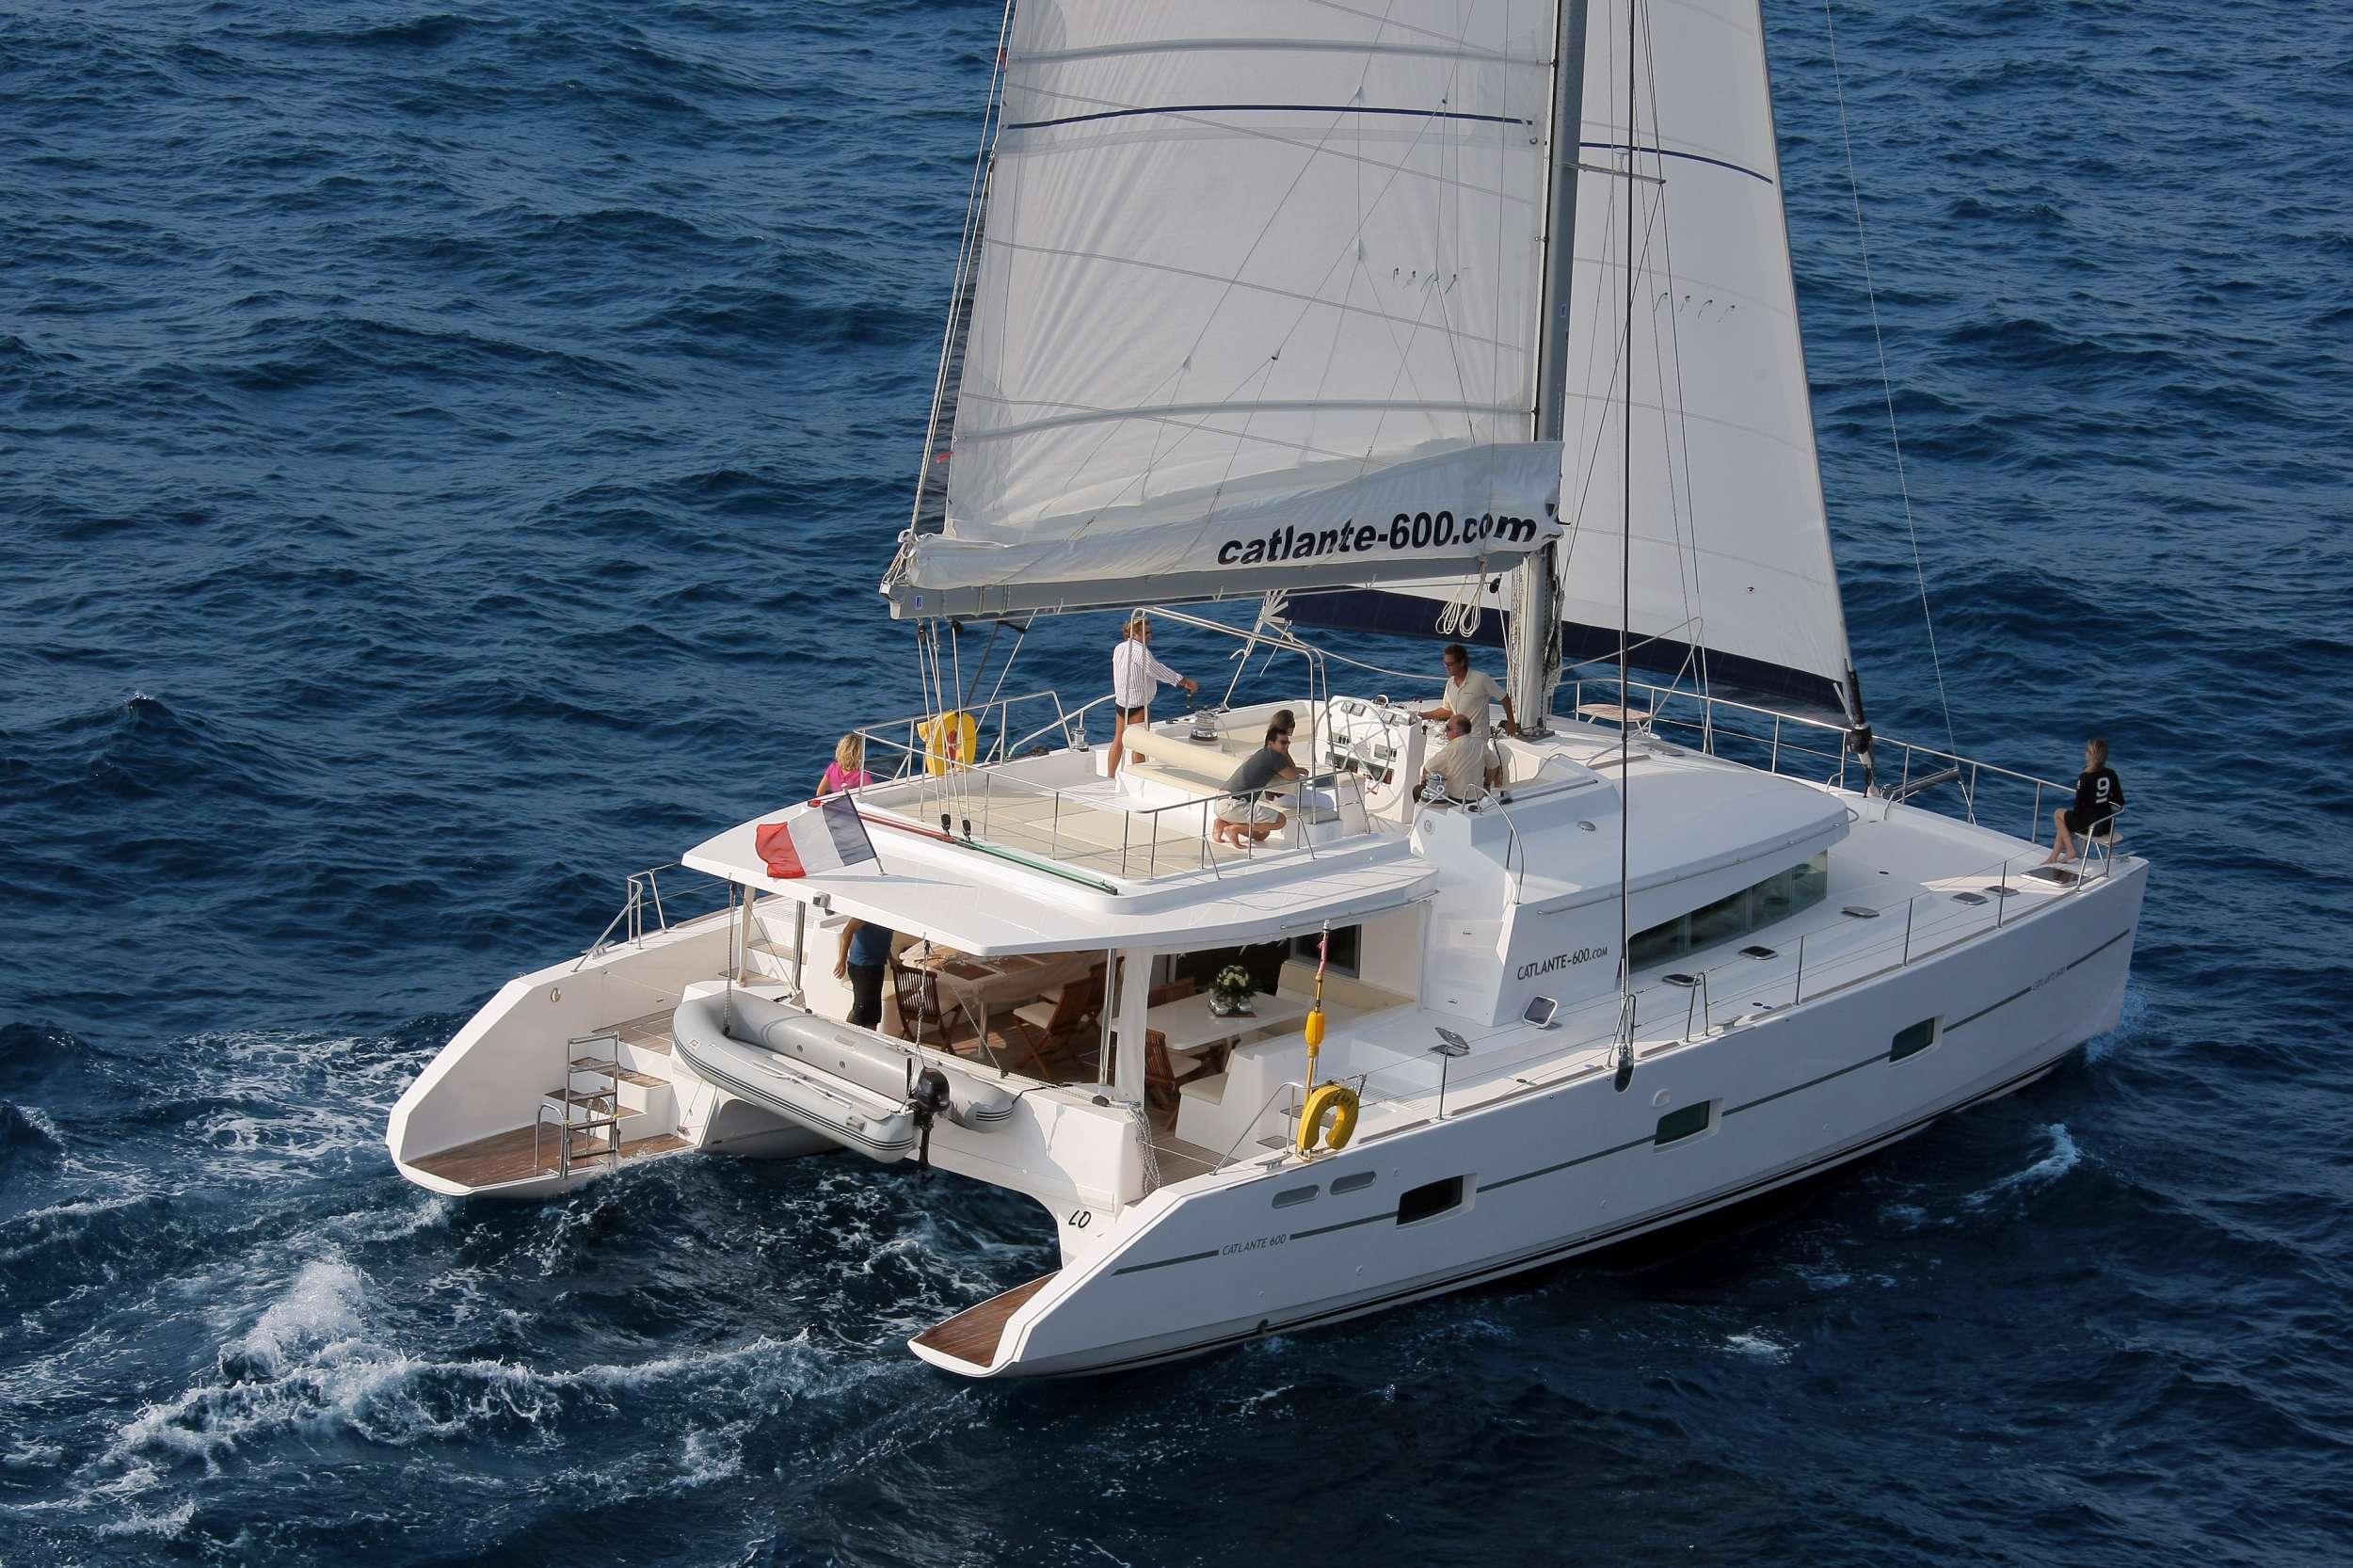 Dream 60 - Littr&eacute; &amp; Tauceti - Yacht Charter Maldives & Boat hire in W. Med -Naples/Sicily, W. Med - Spain/Balearics, Croatia Bahamas, Indian Ocean and SE Asia 5